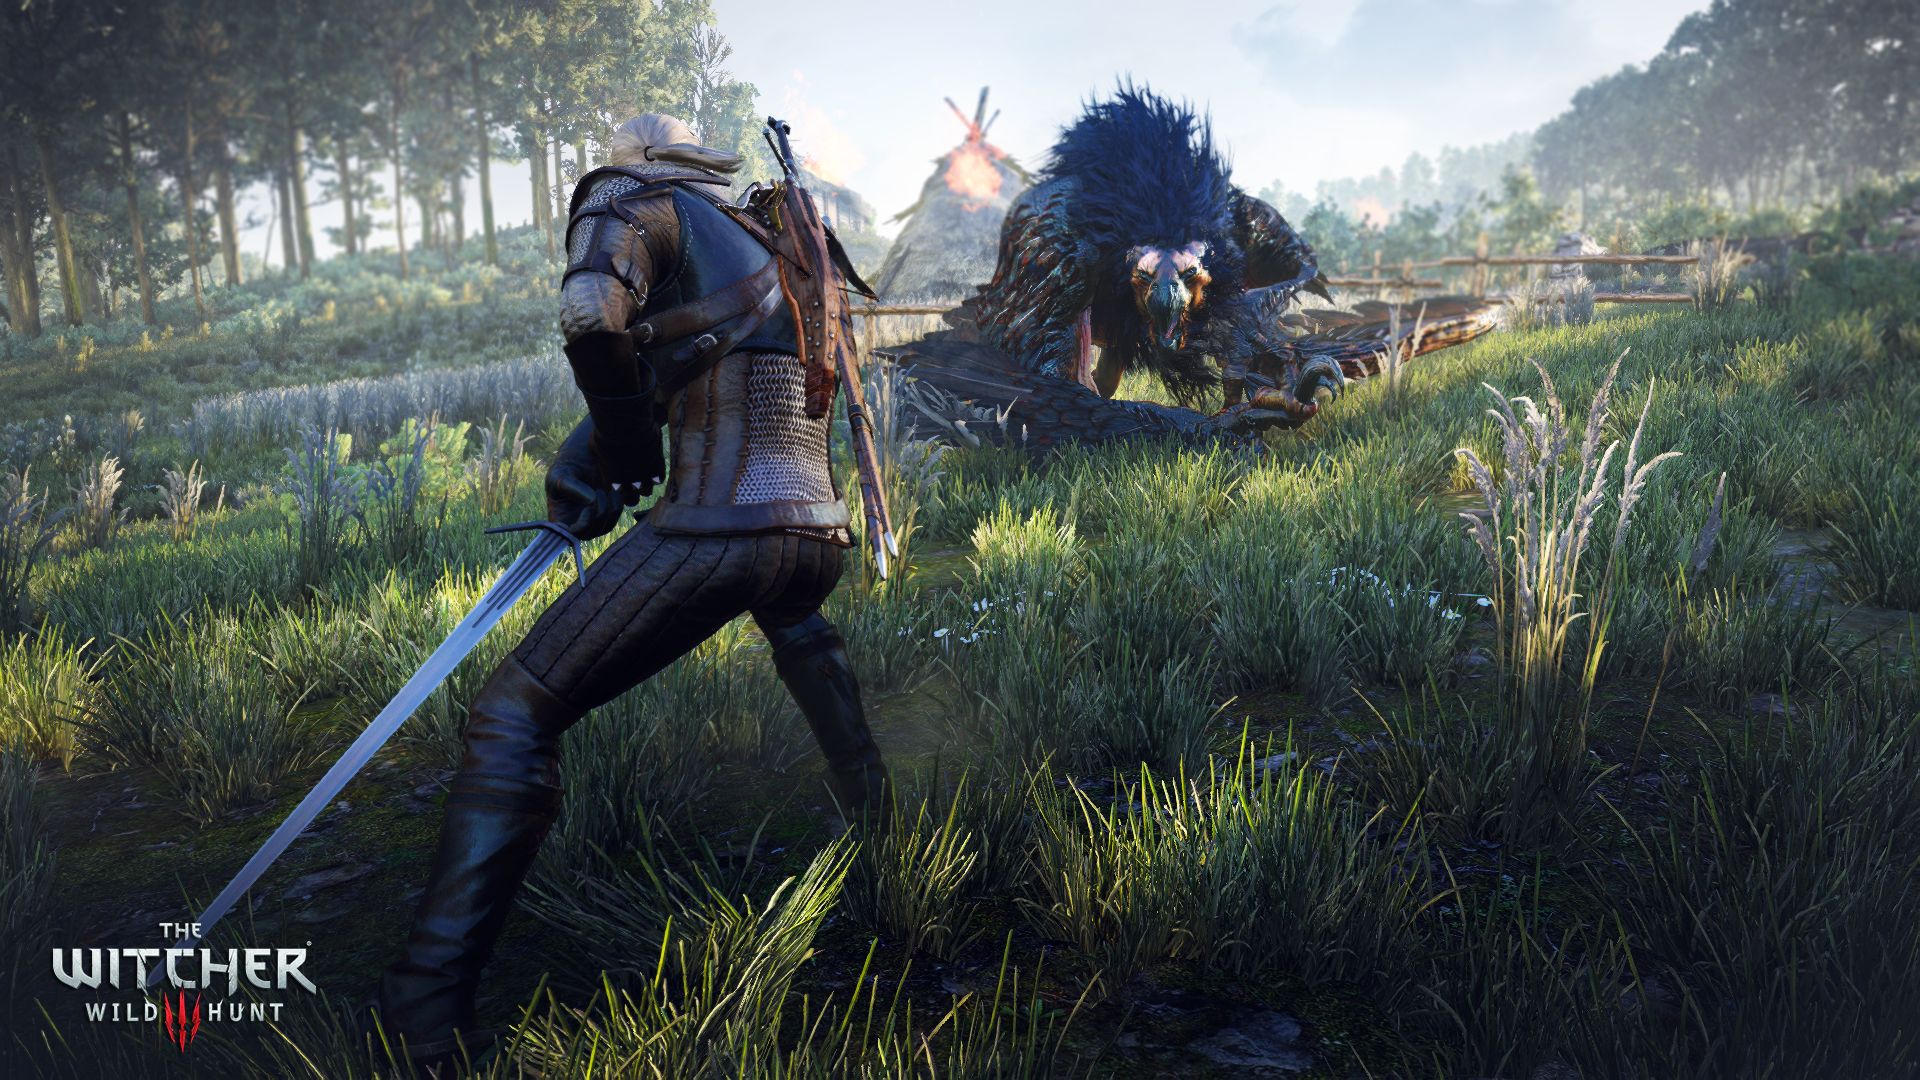 An image displaying Geralt hunting a monster in Witcher 3